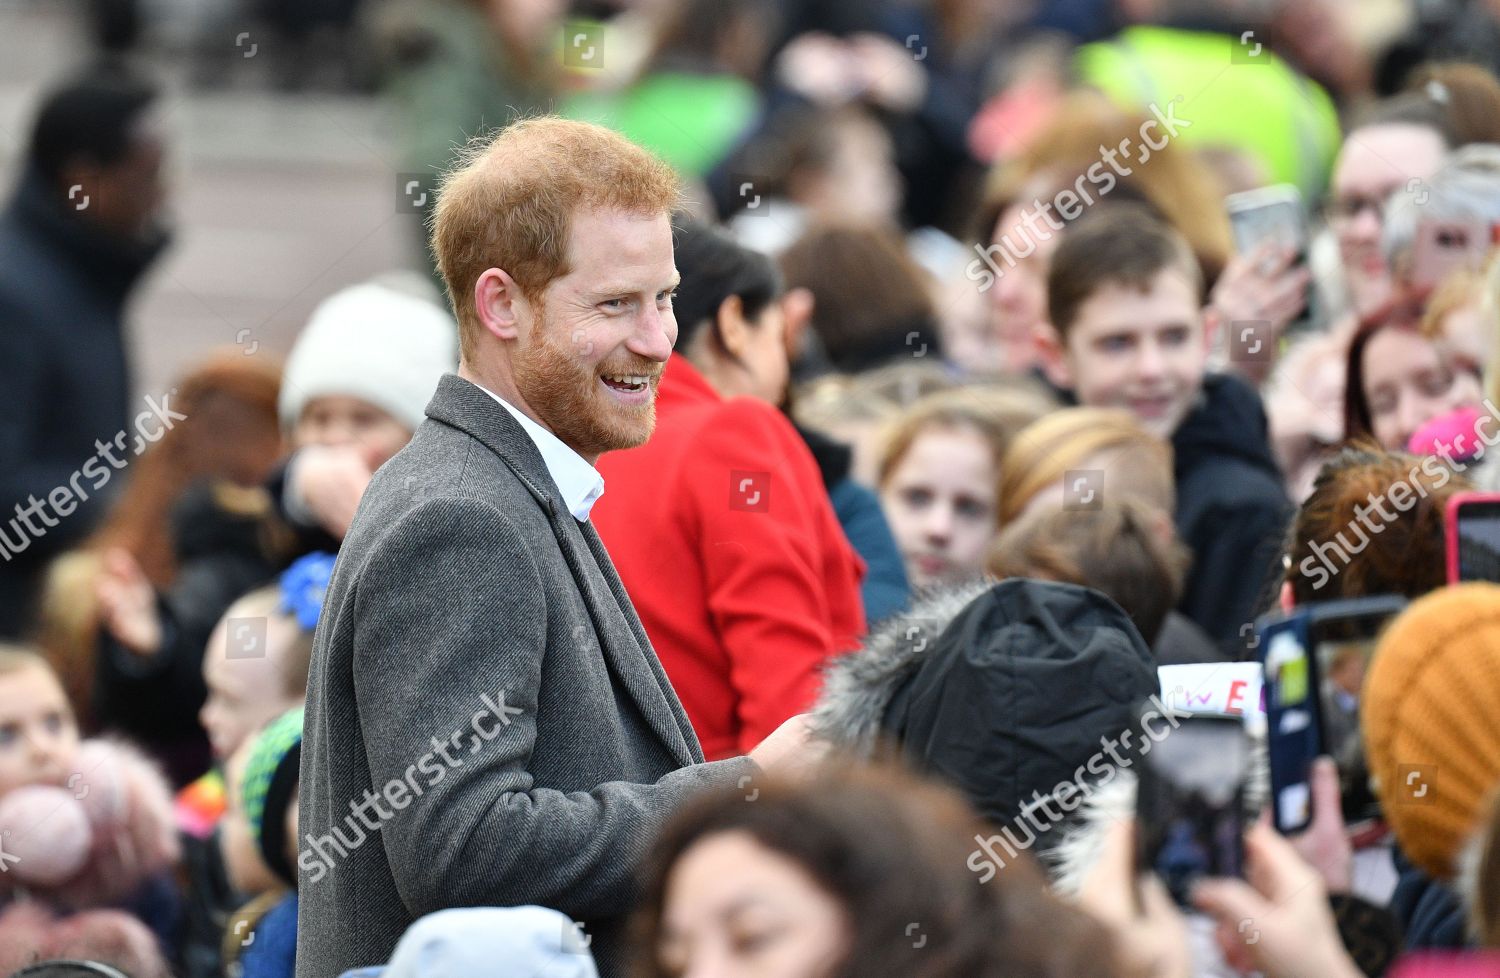 prince-harry-and-meghan-duchess-of-sussex-visit-to-birkenhead-uk-shutterstock-editorial-10056189aw.jpg